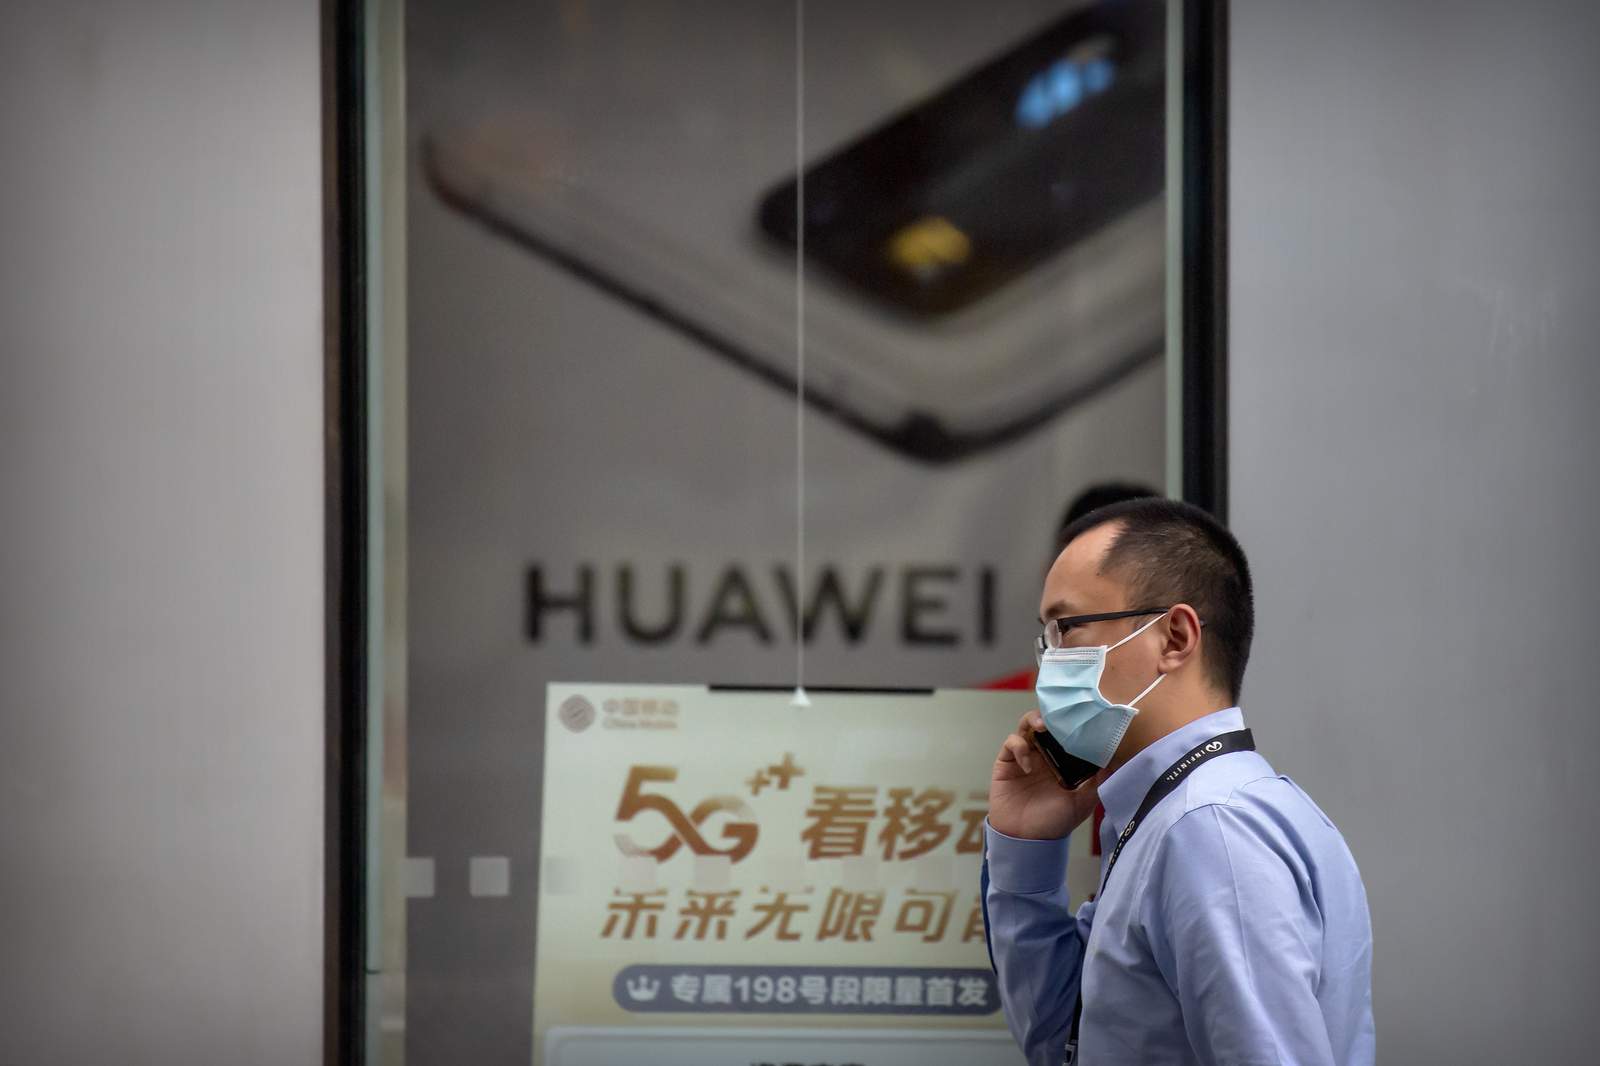 Huawei posts 13.1% revenue growth amid pandemic, sanctions